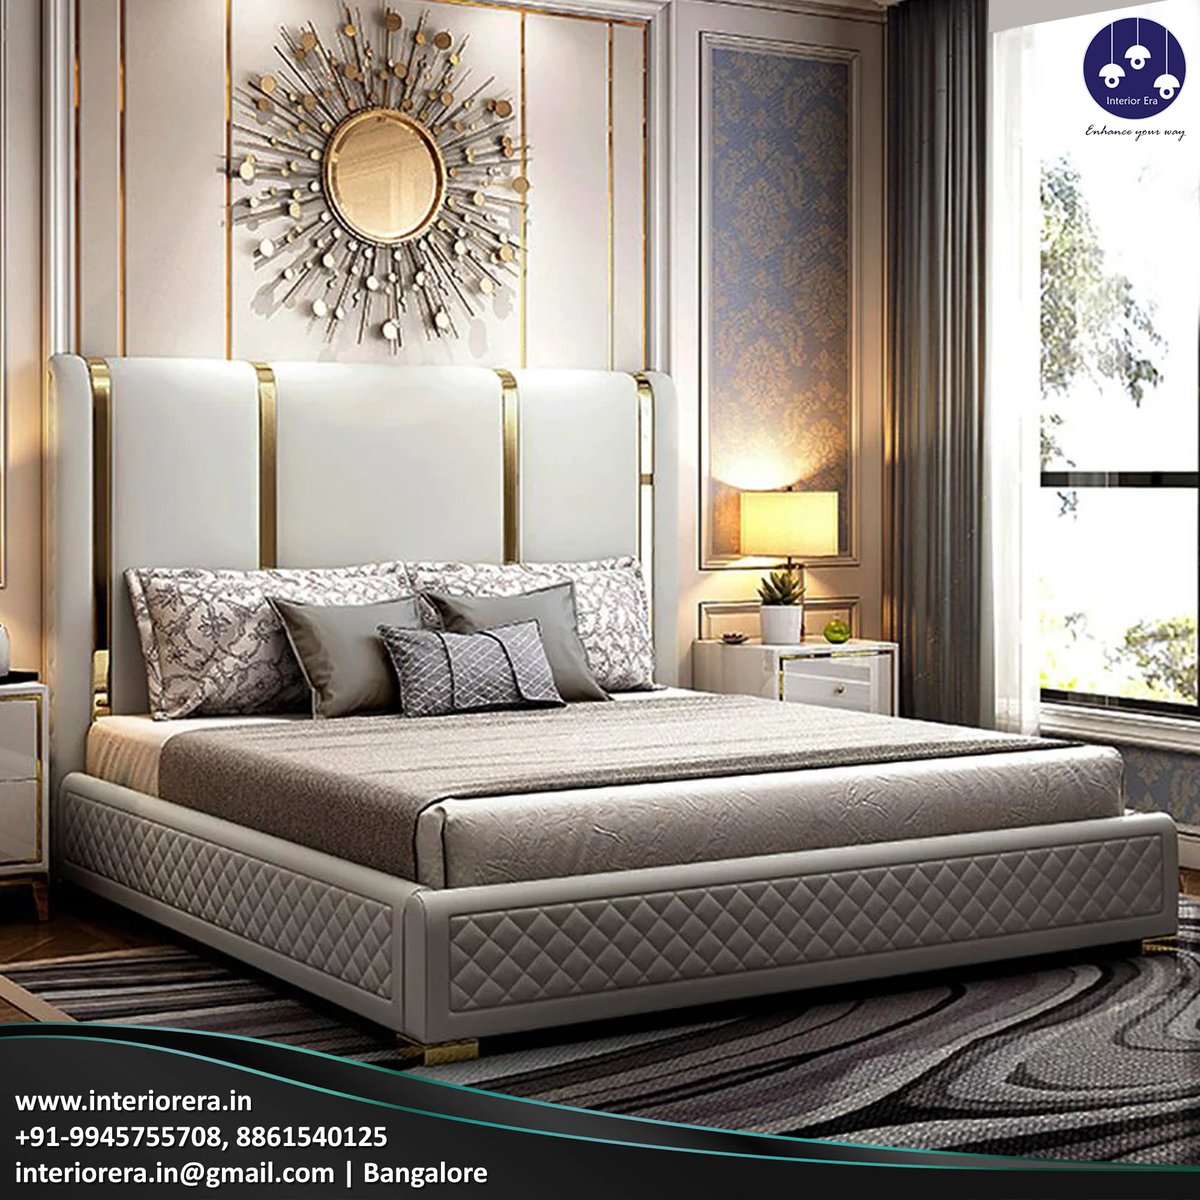 A Bedroom Is More Than Just A Sleeping Space; It’s A Private Haven Where You Start And Finish Your Day...!

#home #homedecor #homeinterior #bedroom #bedroomdesign #bedroominterior #interior #interiordesign #InteriorDesignMasters #interiorstyling #electroniccity #bangalore